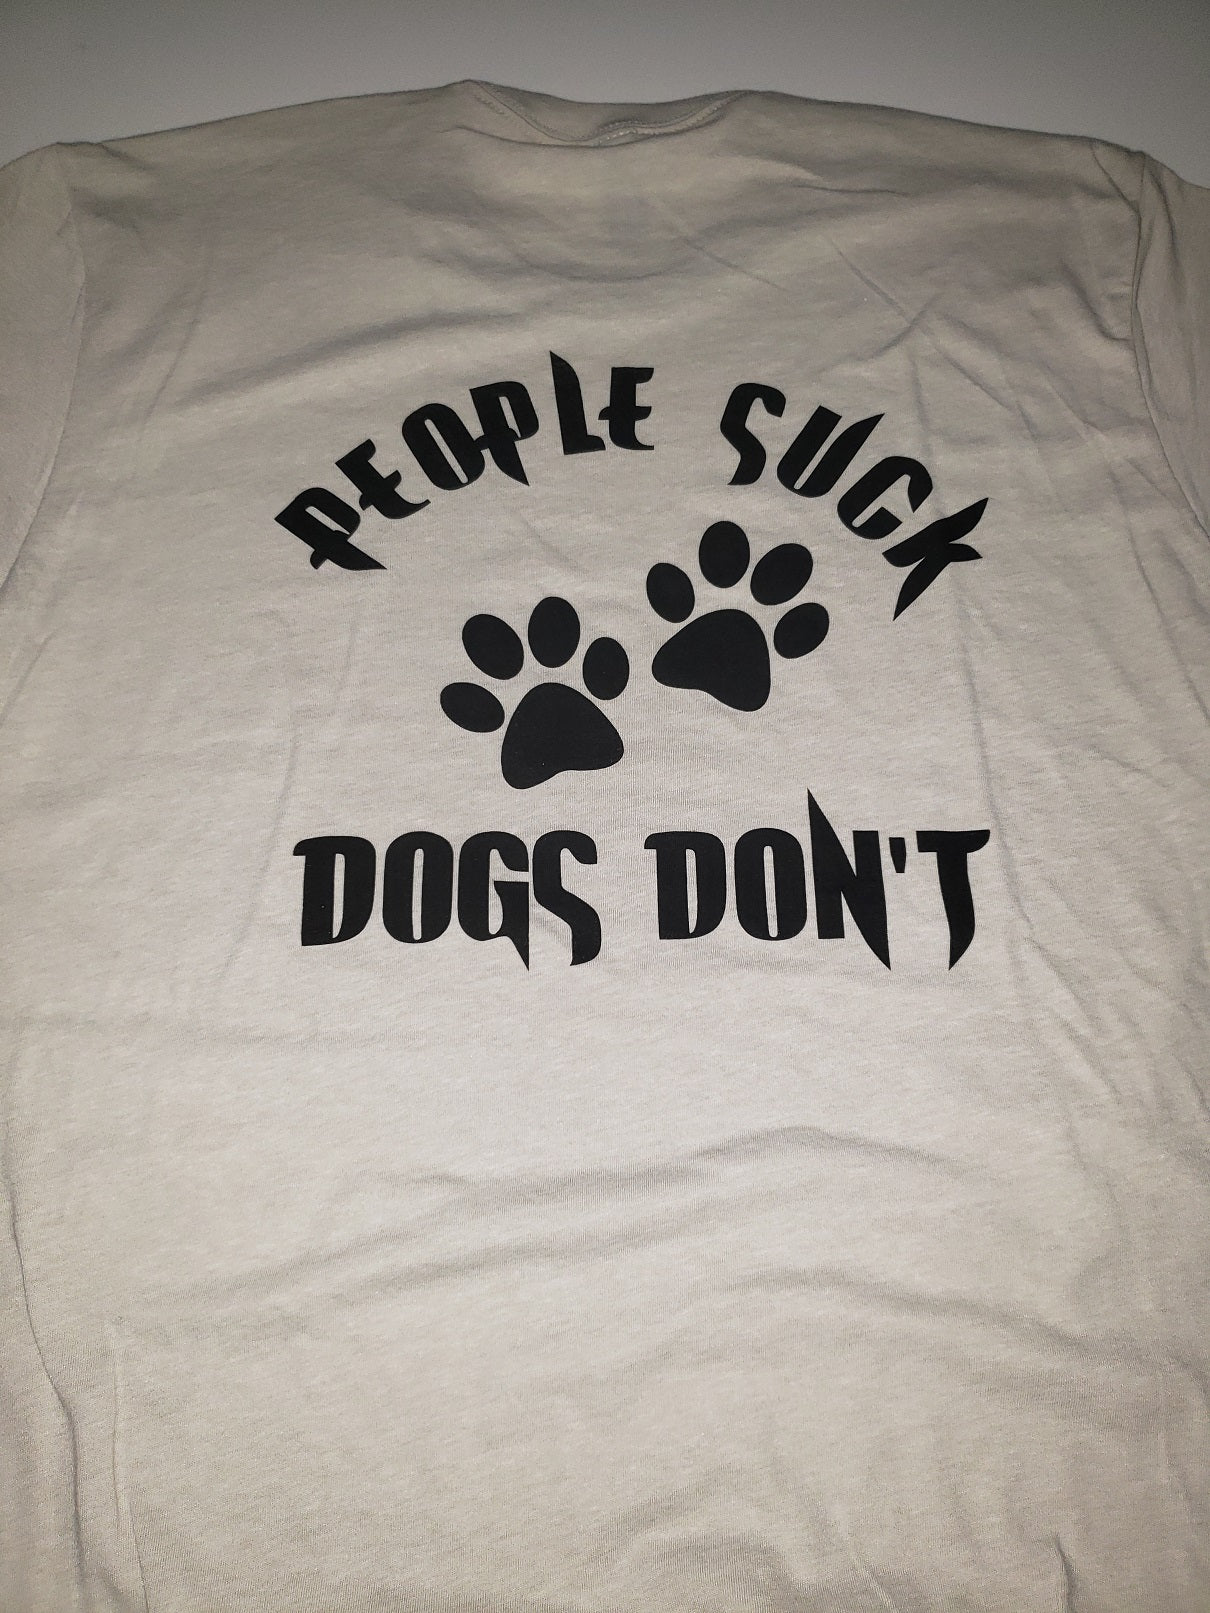 PEOPLE SUCK DOGS DON'T MENS SHORT SLEEVE (4 Colors)